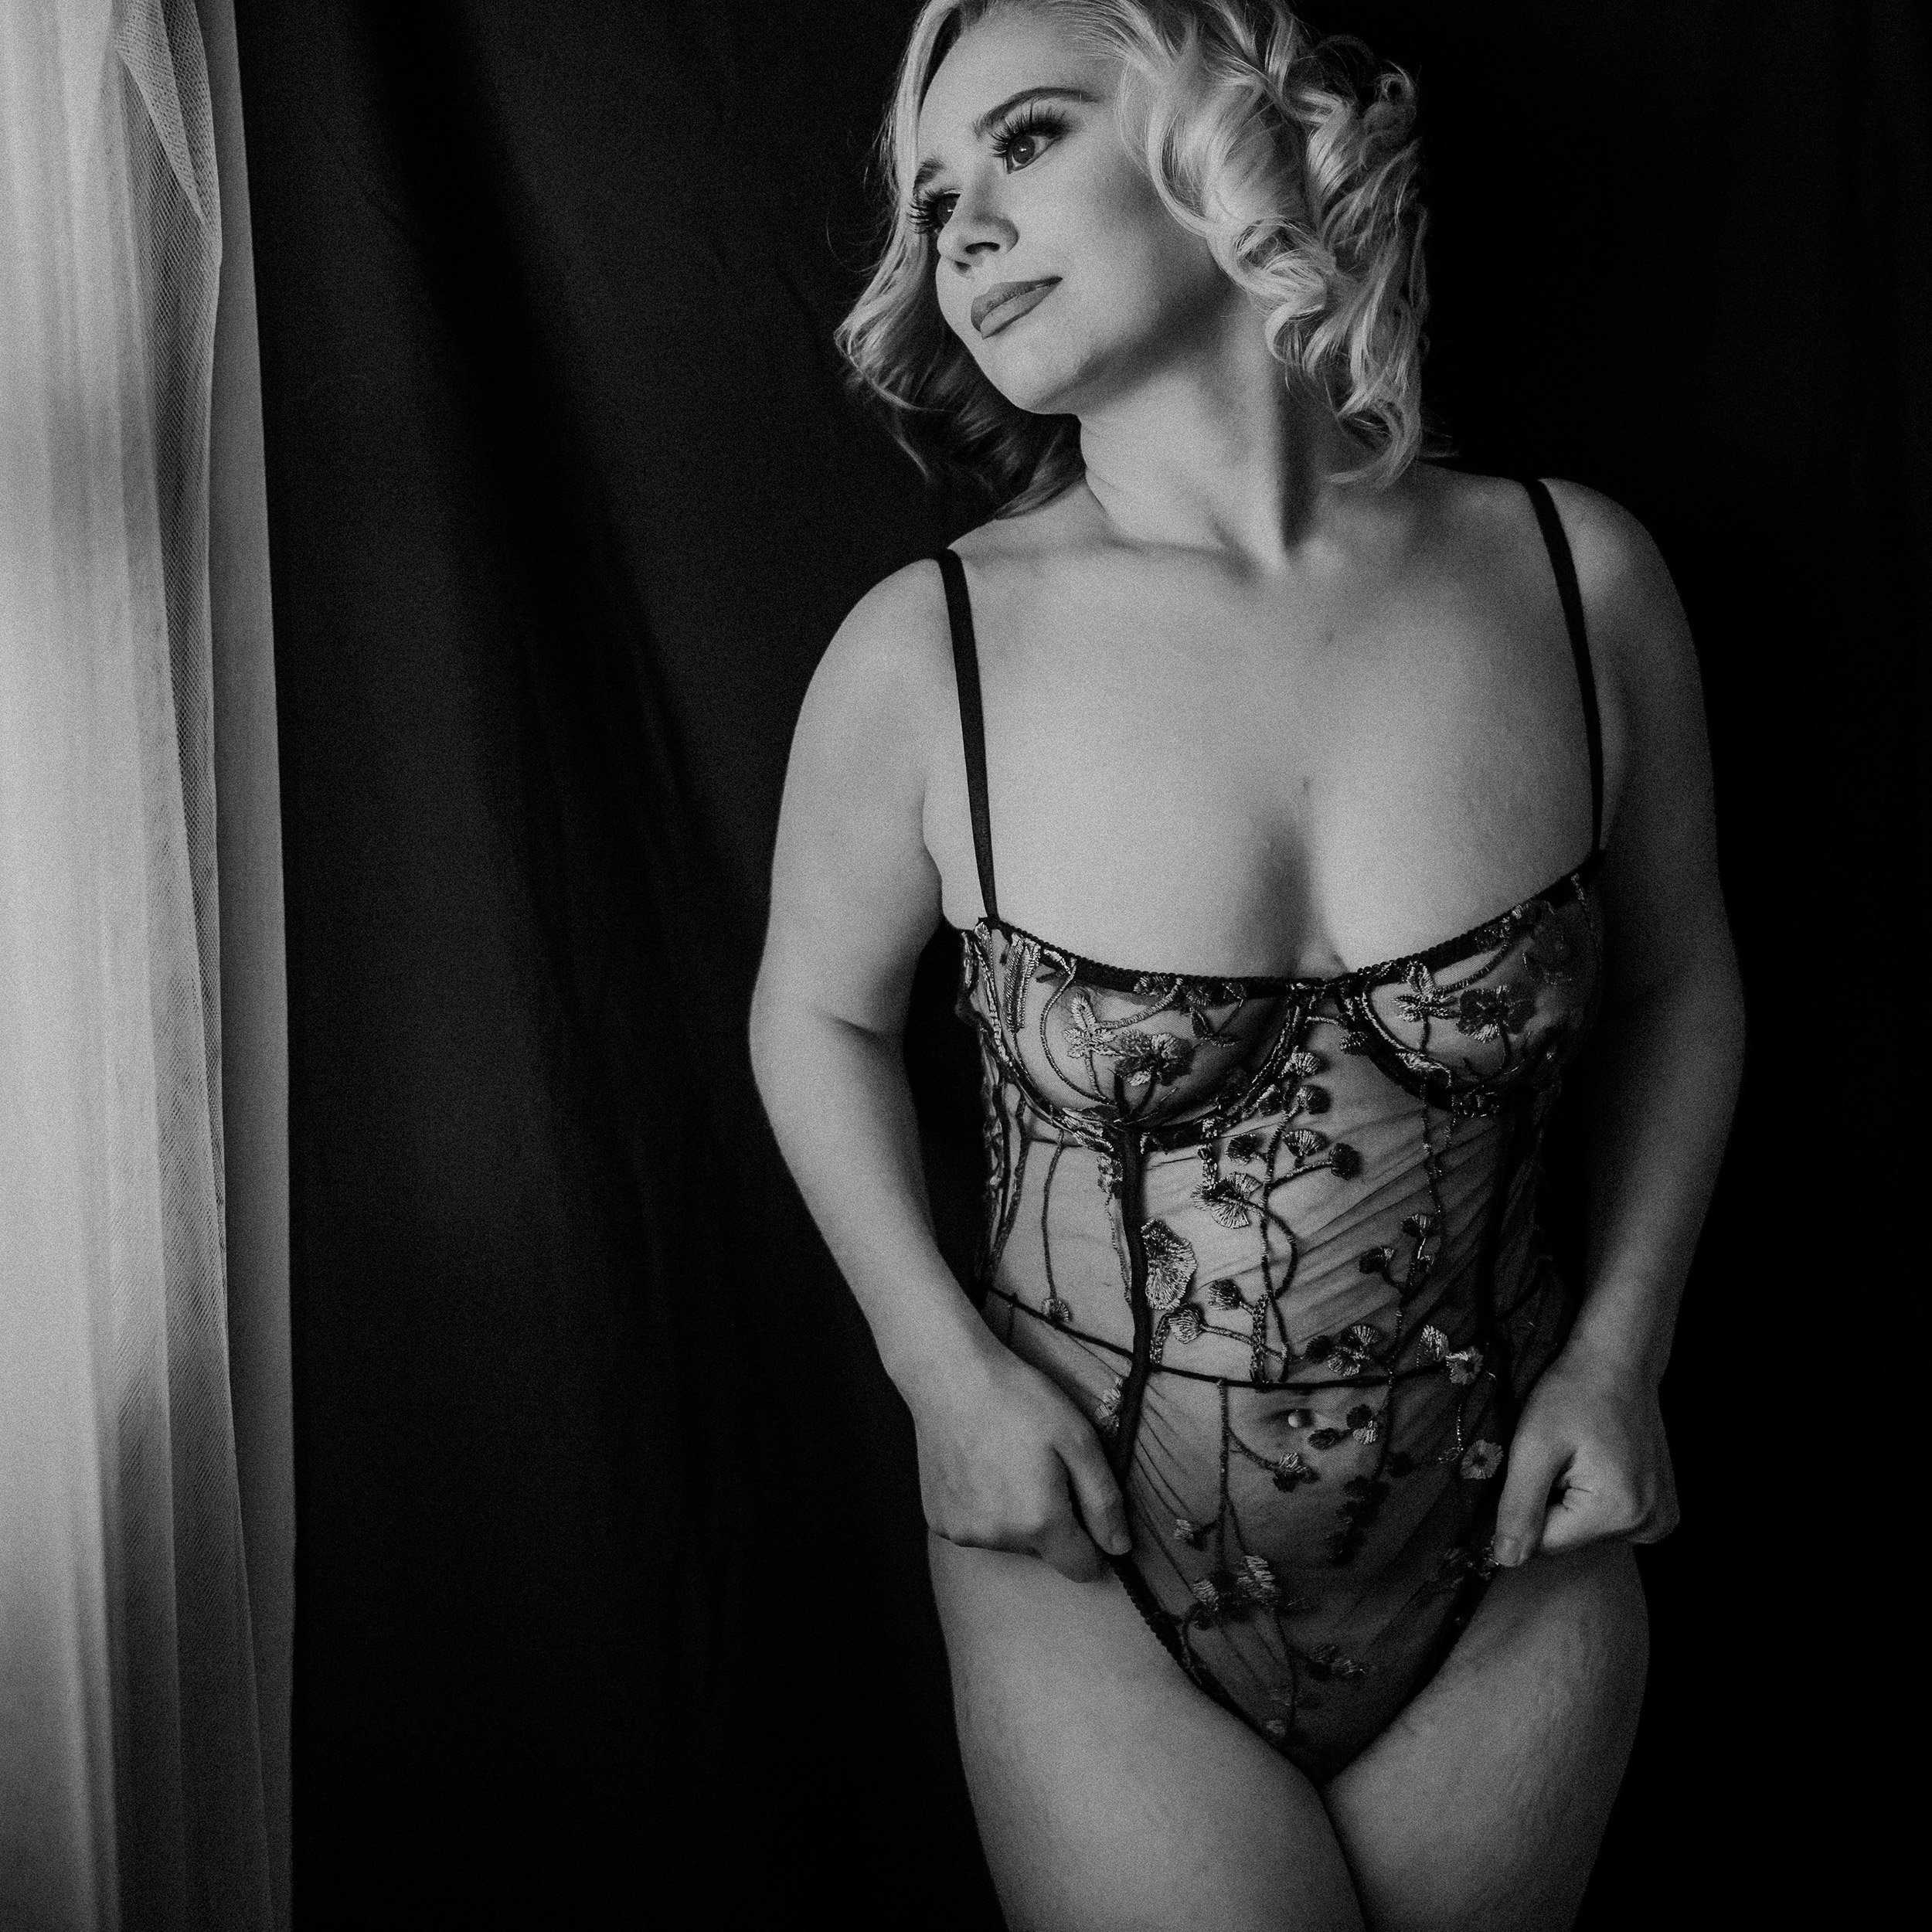 Client-Interview-Boudoir-Shoot-with-Desiree-by-Tampa-boudoir-photographer-Tami-Keehn